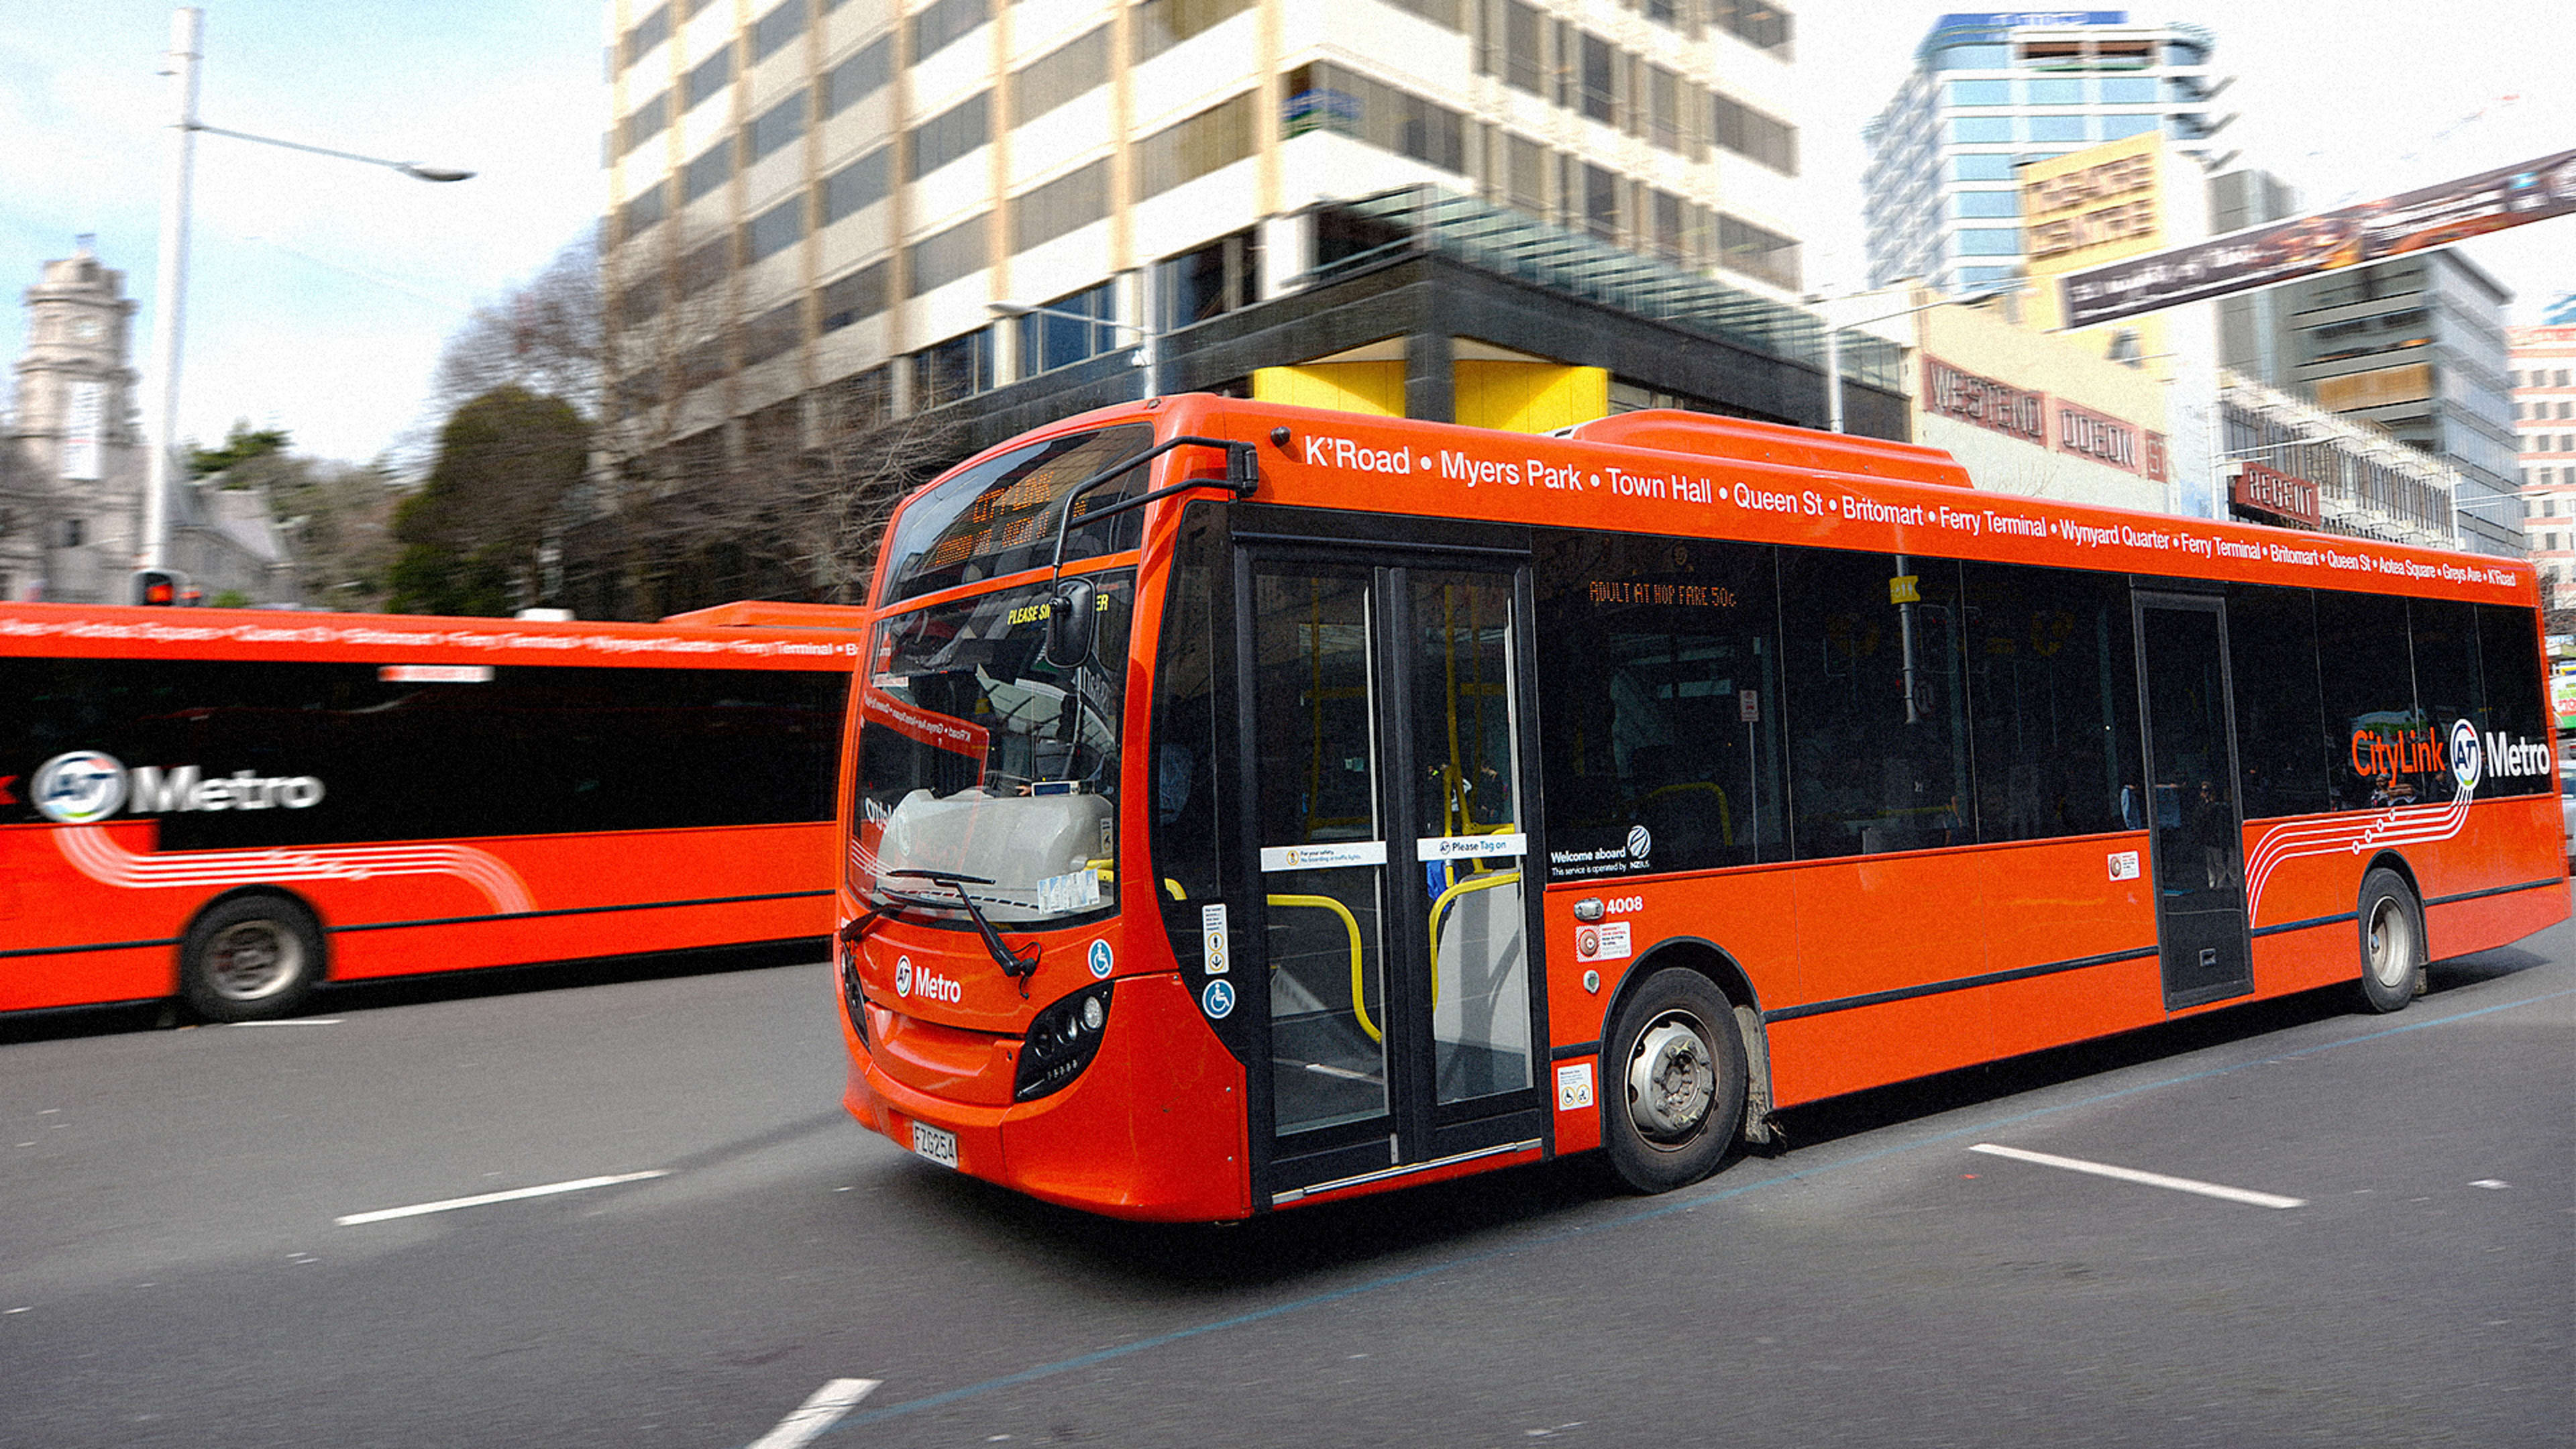 Auckland, New Zealand, has figured out how to get more people to use transit